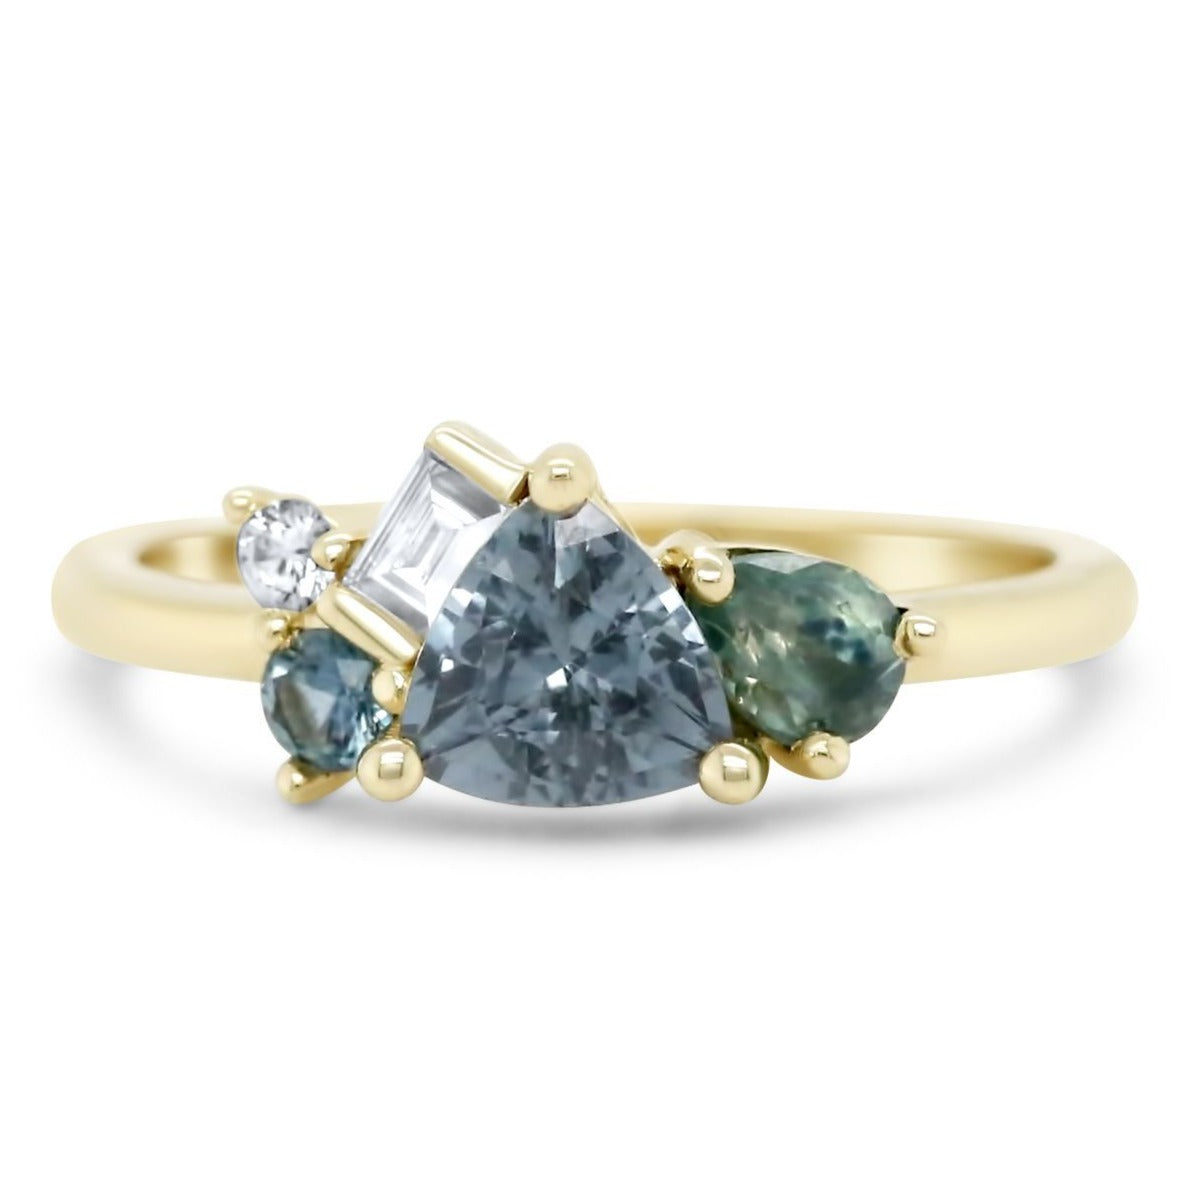 Tanzanian spinel trillion gemstone 14k yellow gold ring with Montana sapphire and diamond cluster